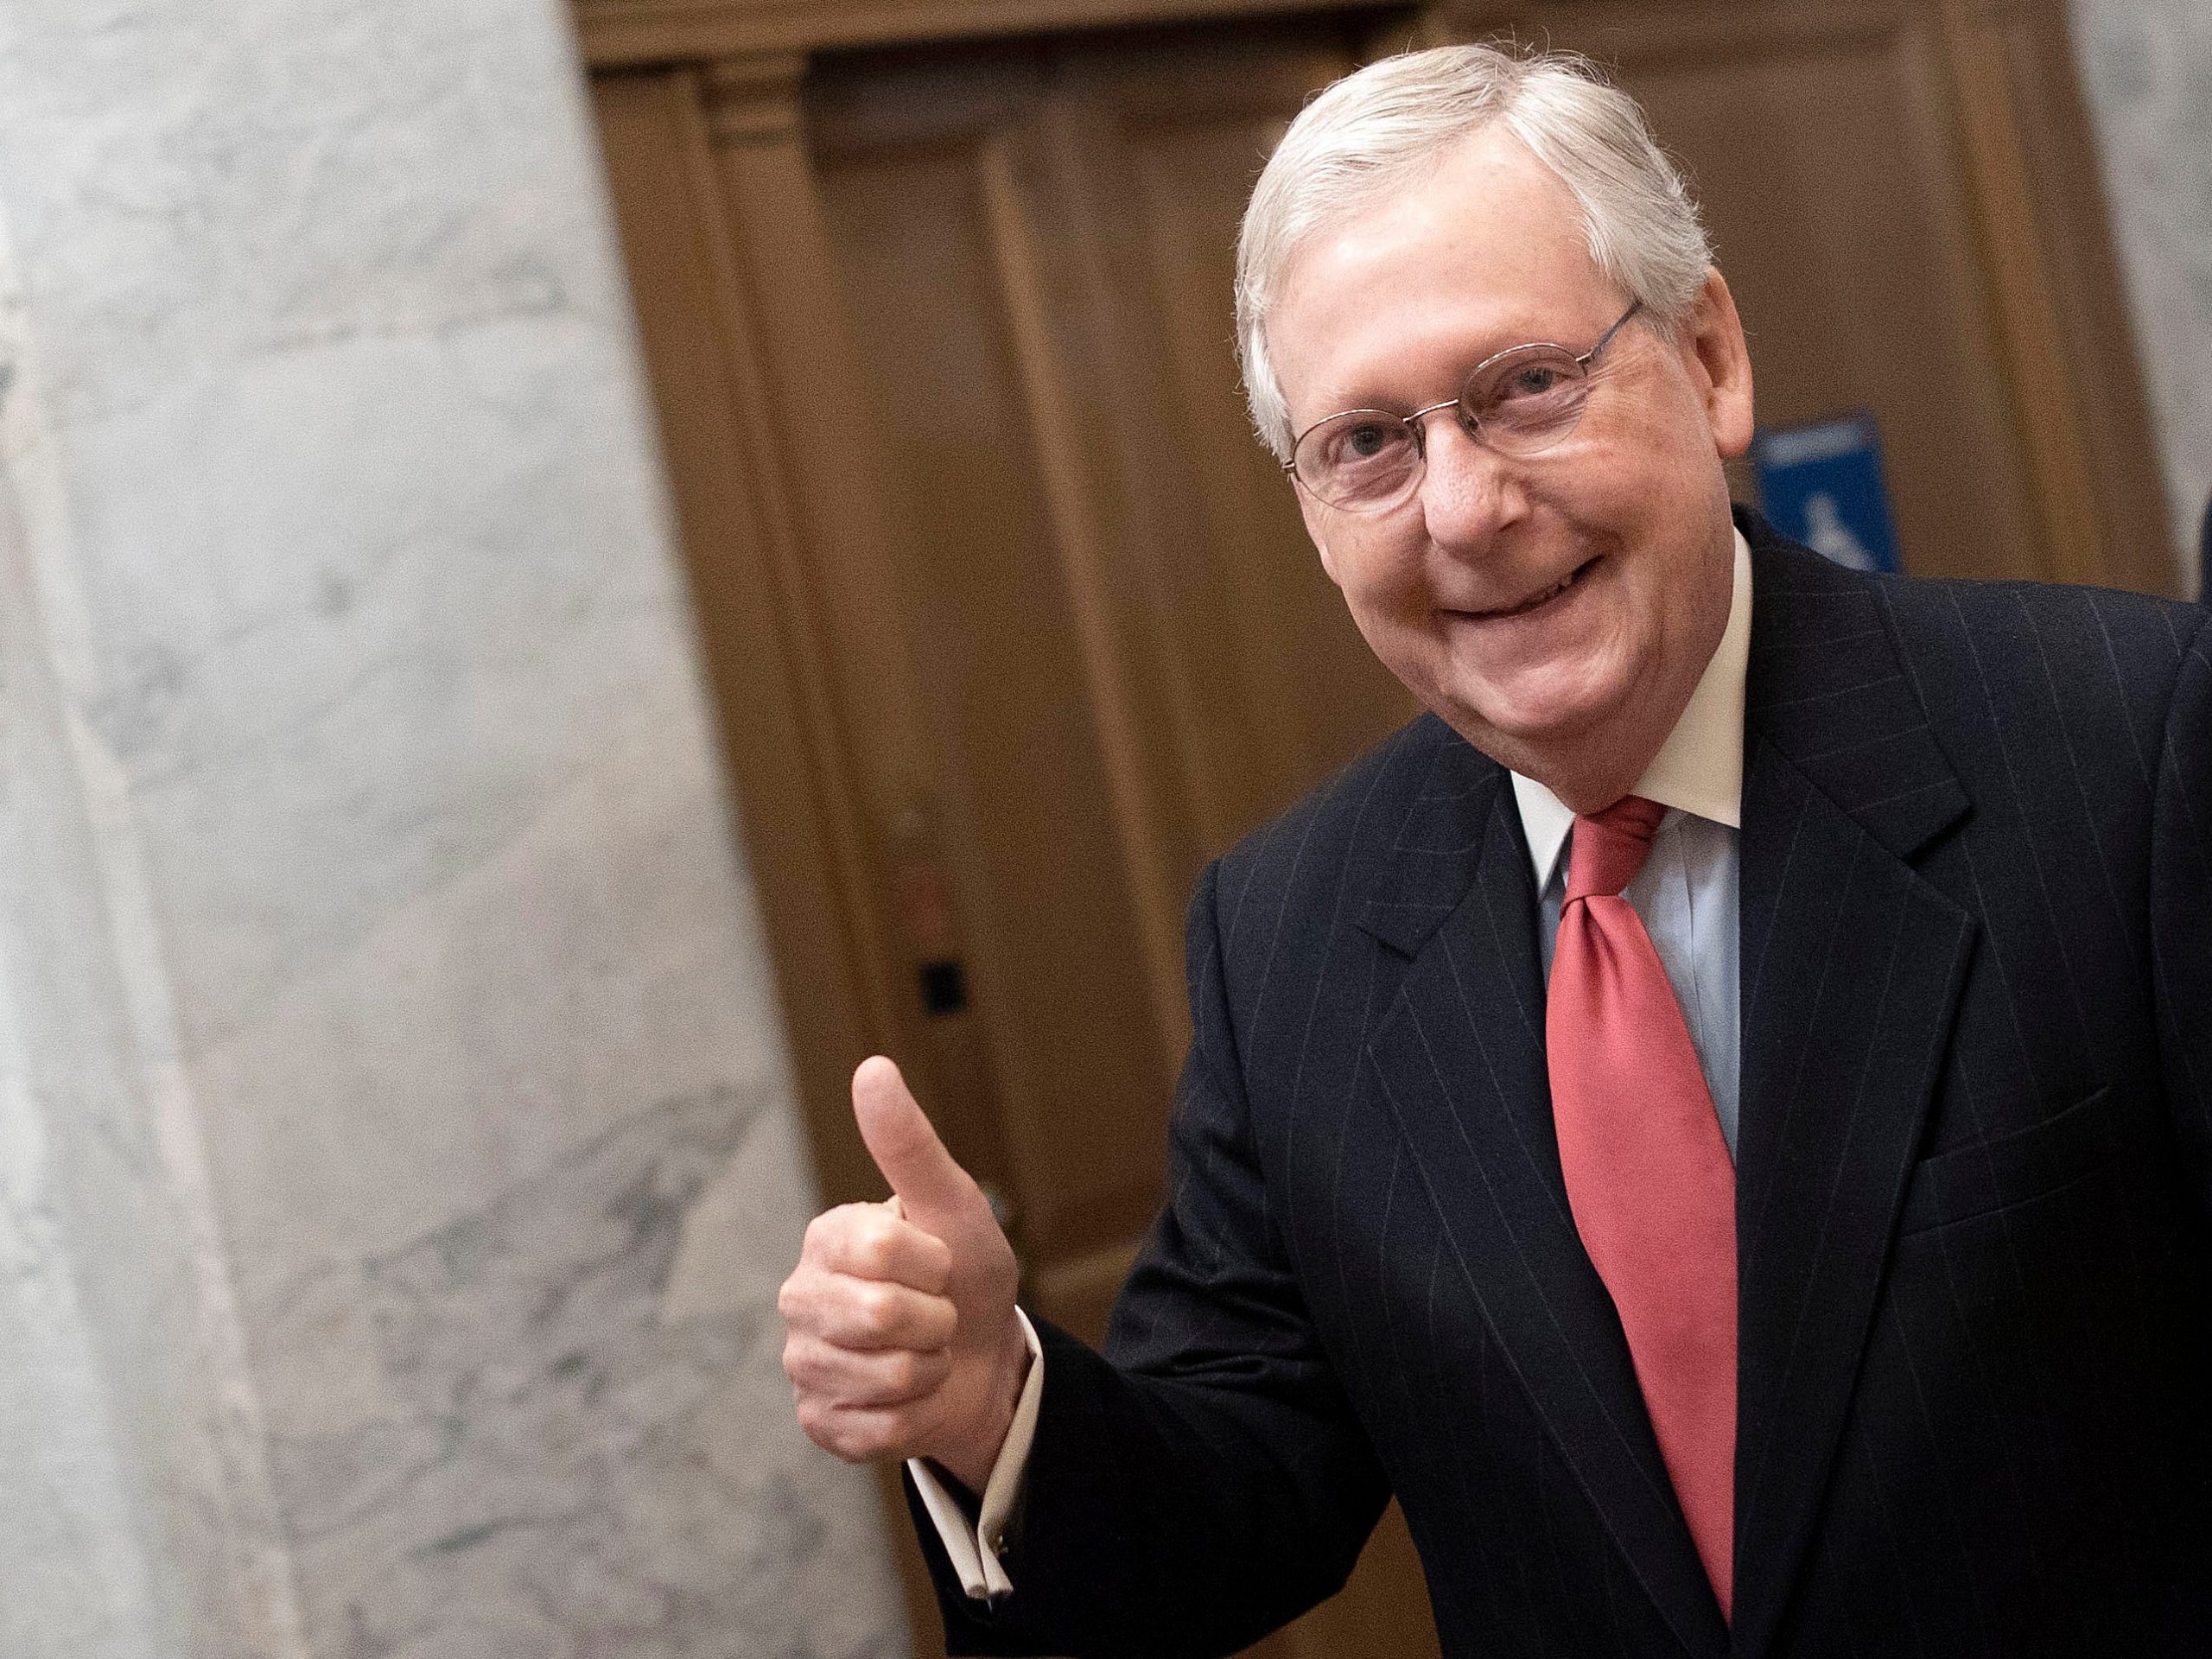 U.S. Senate Majority Leader Mitch McConnell (R-KY) gives a thumbs up sign as he arrives at the U.S. Capitol on March 25, 2020 in Washington, DC.